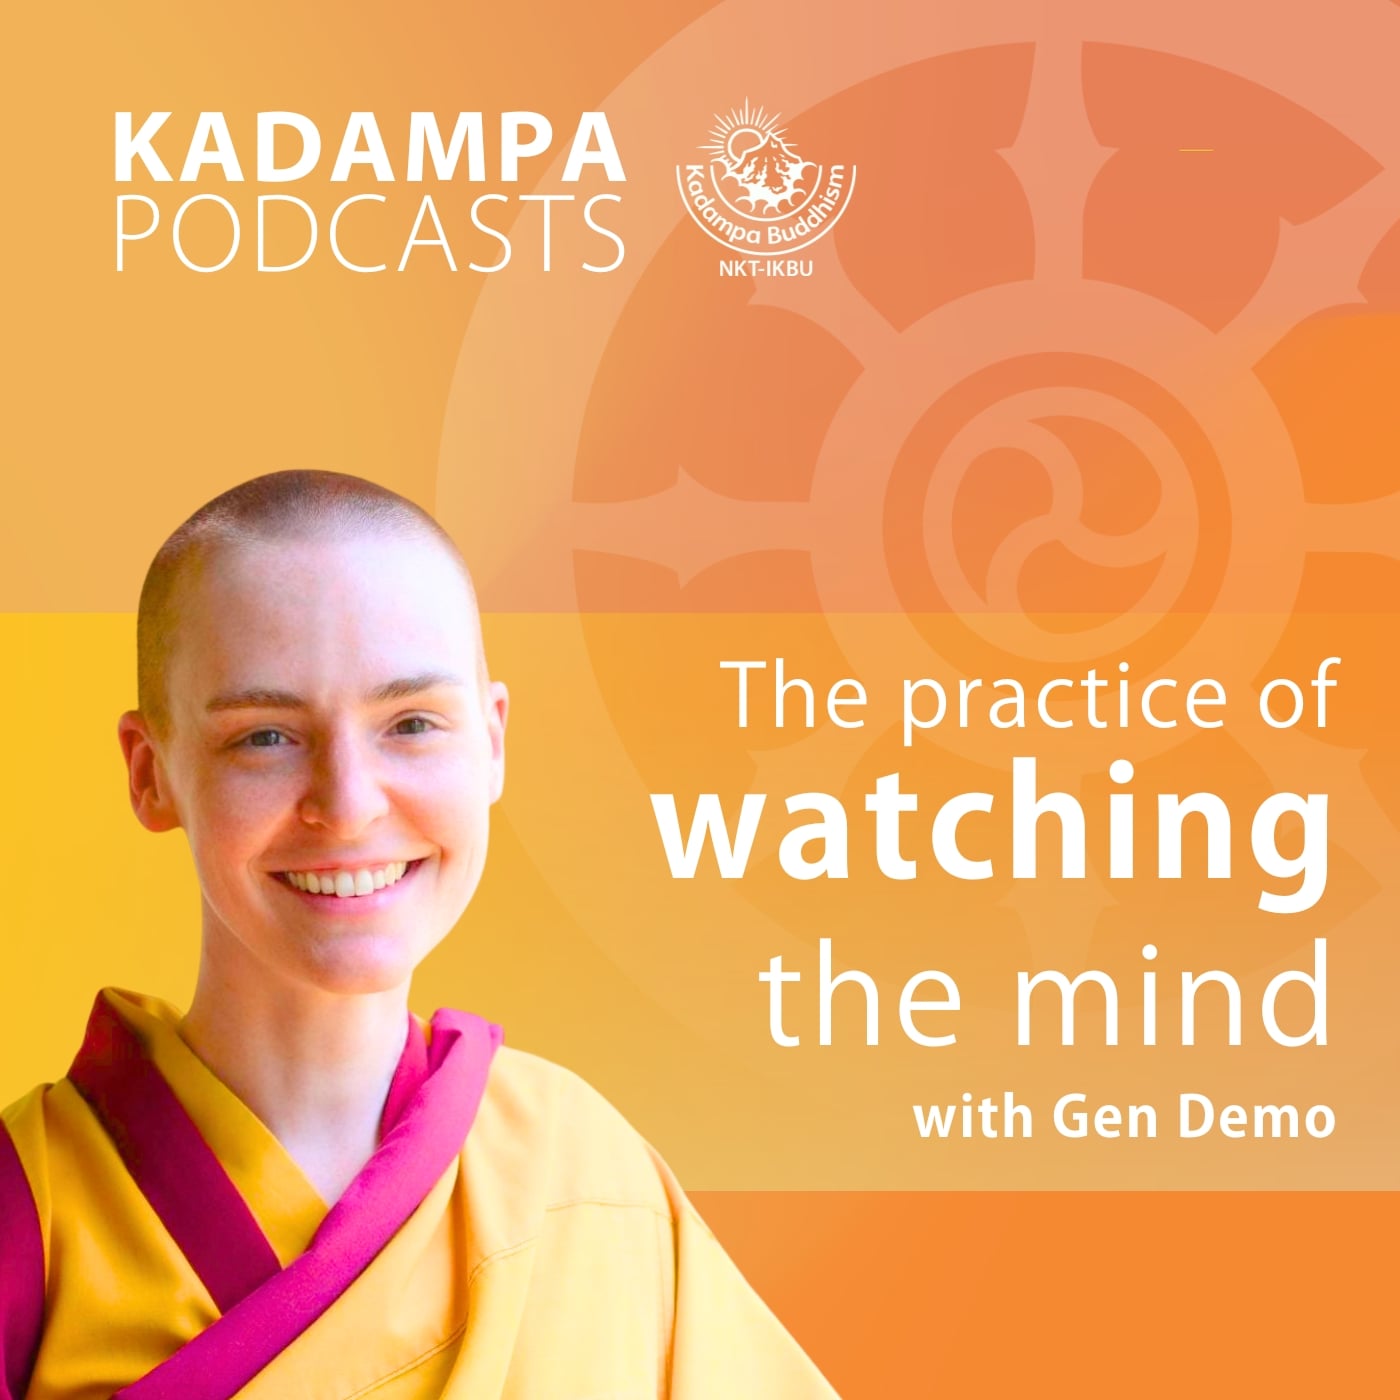 The practice of watching the mind